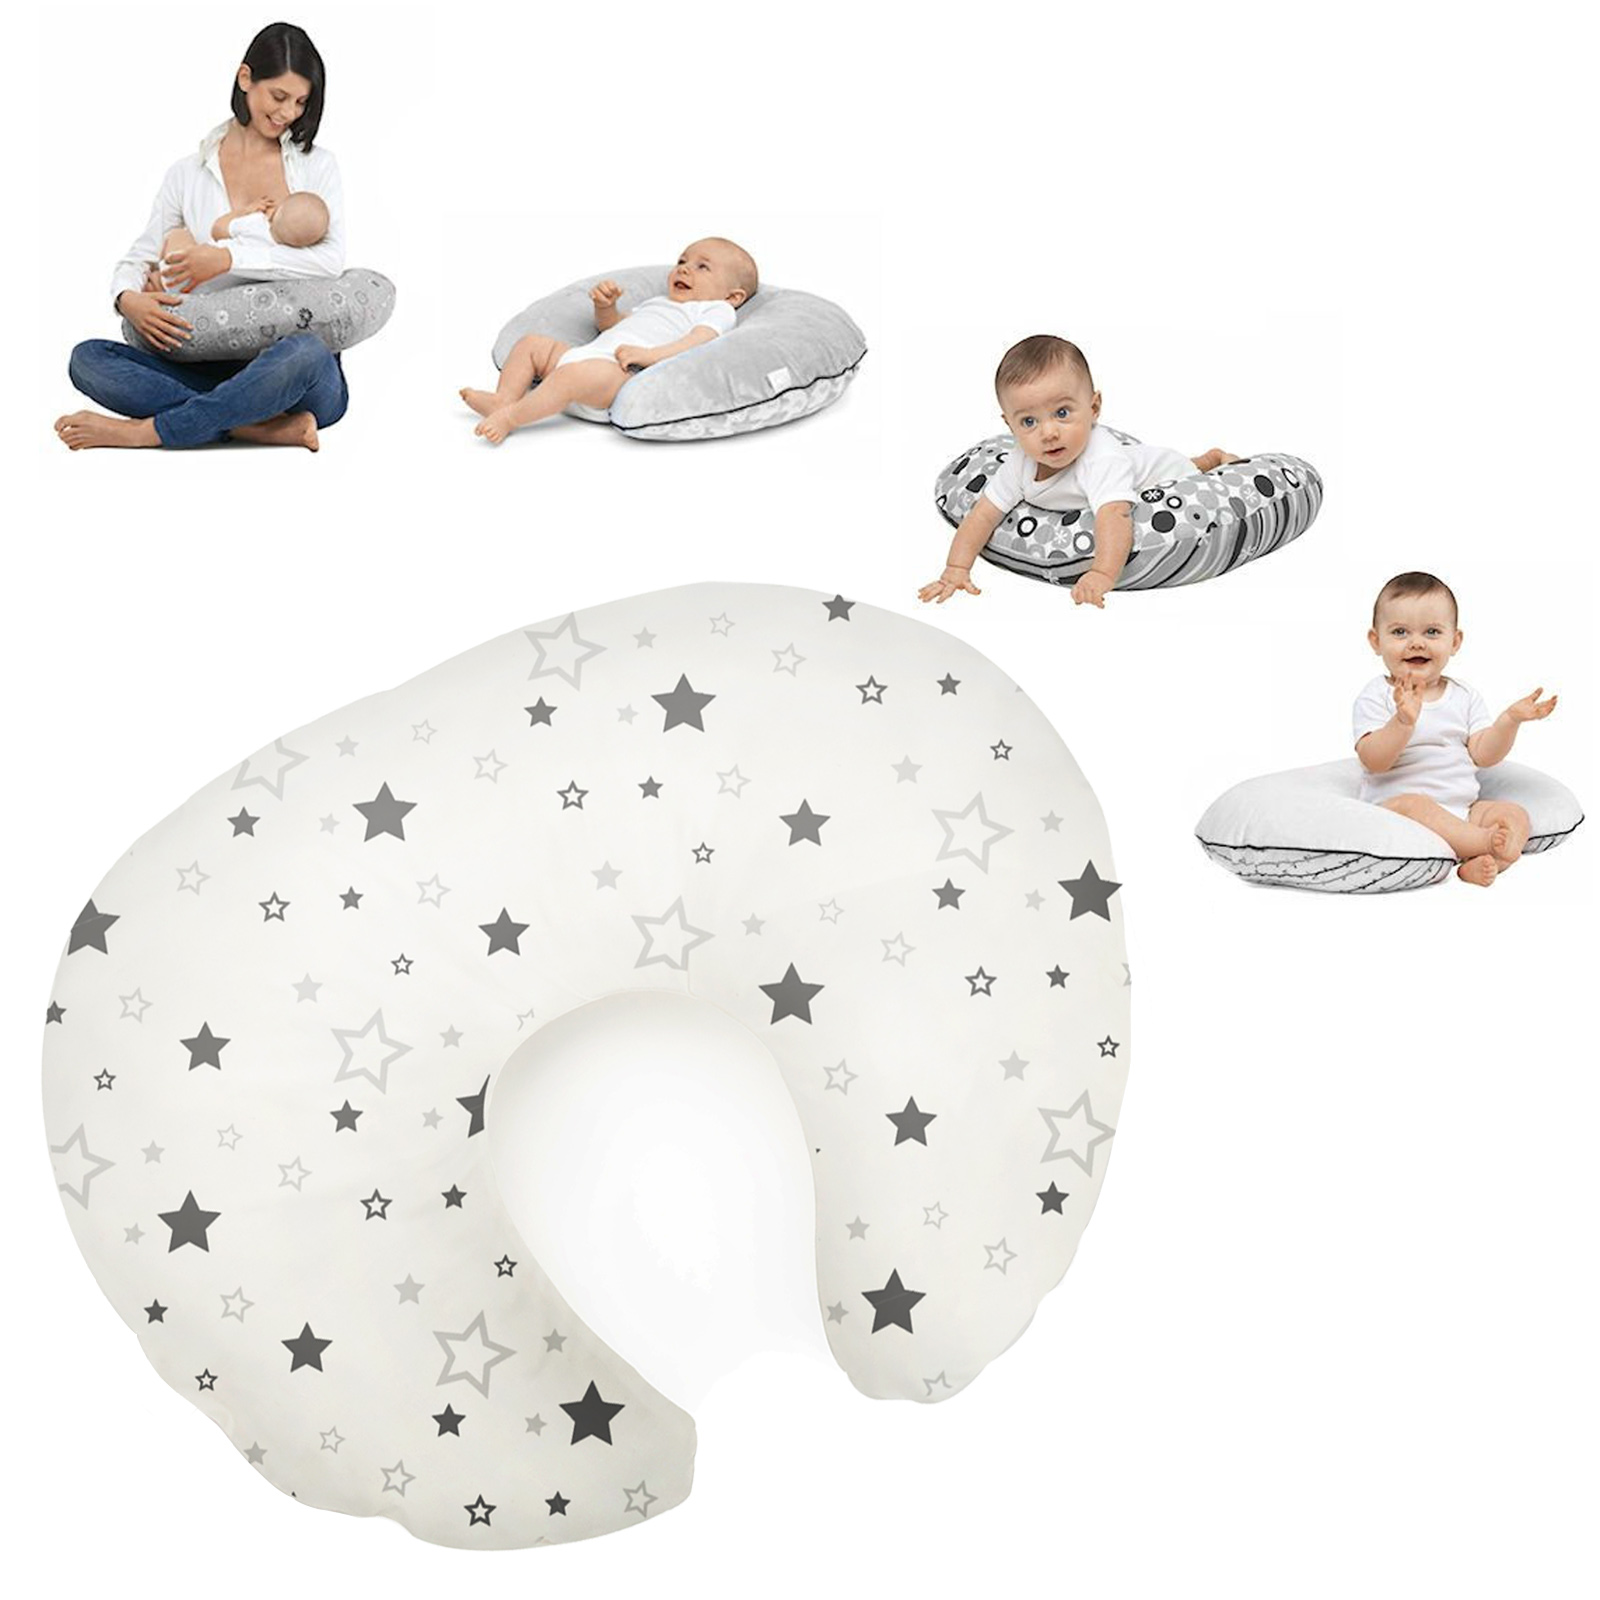 Cuddle Co 4 in 1 Luxury Feeding and Infant Support Pillow - Grey Star..